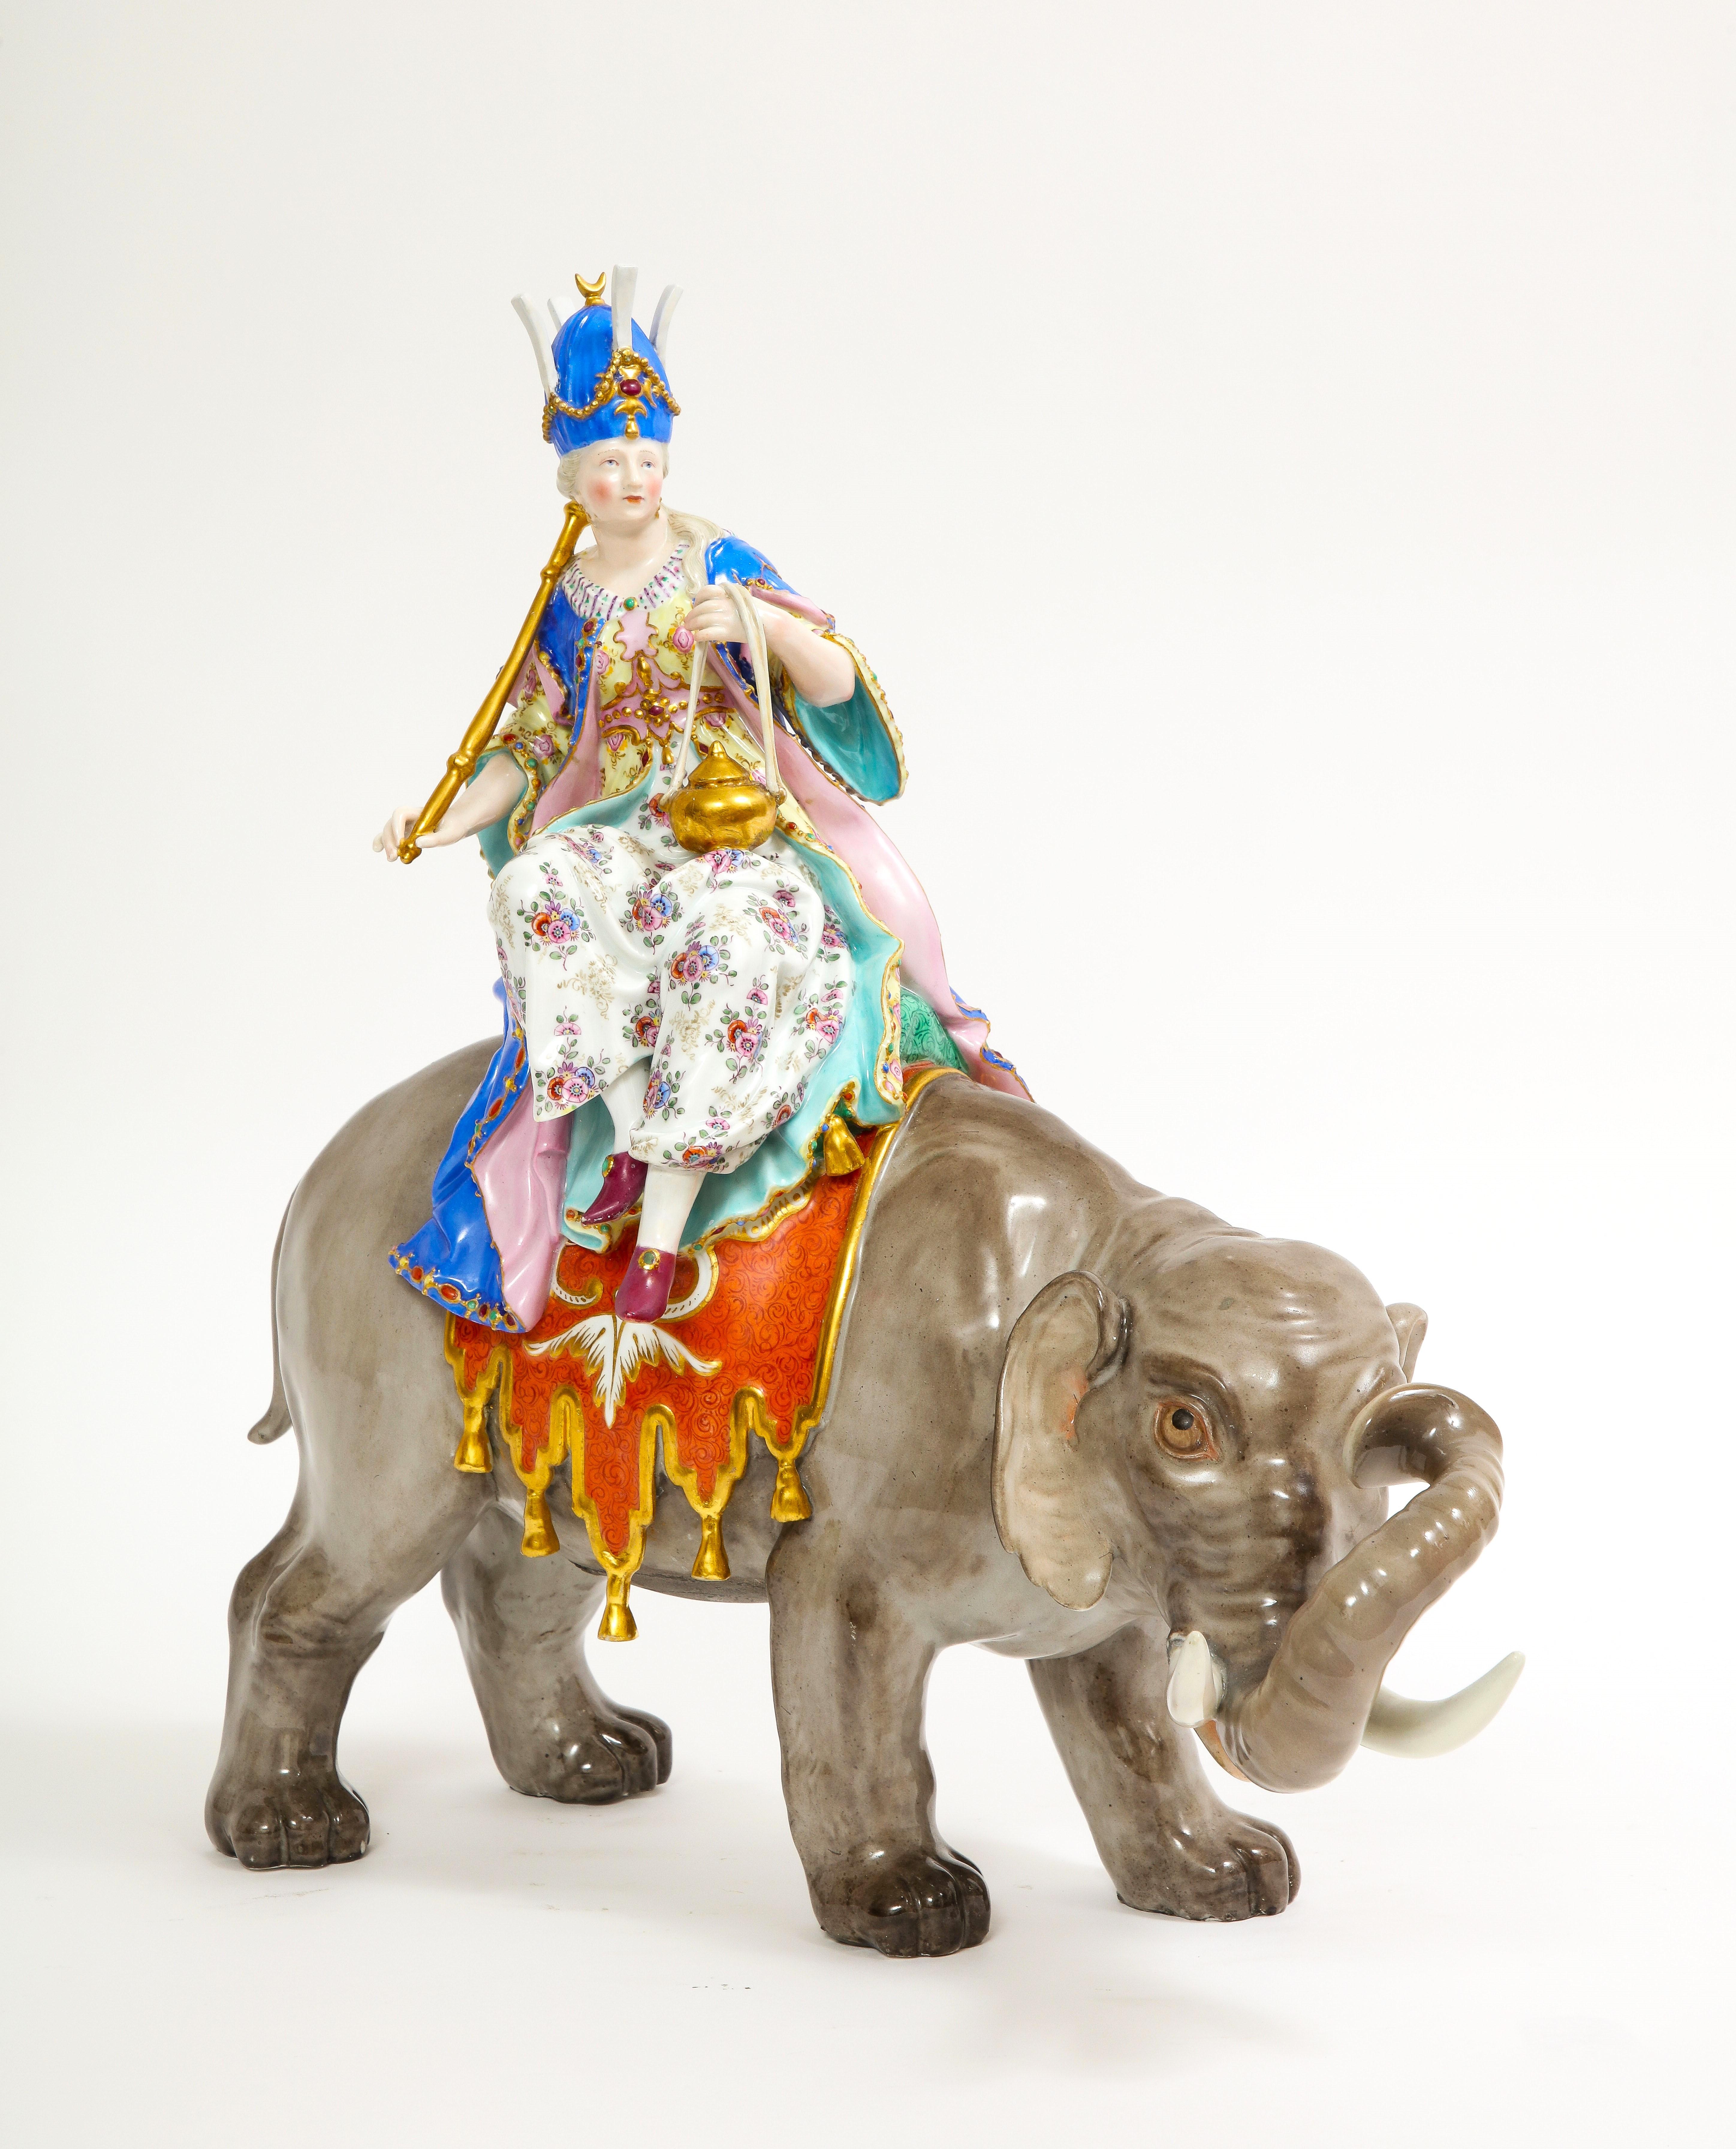 Louis XVI 19th C. Meissen Porcelain Figure of a Sultana Riding an Elephant with a Crown For Sale